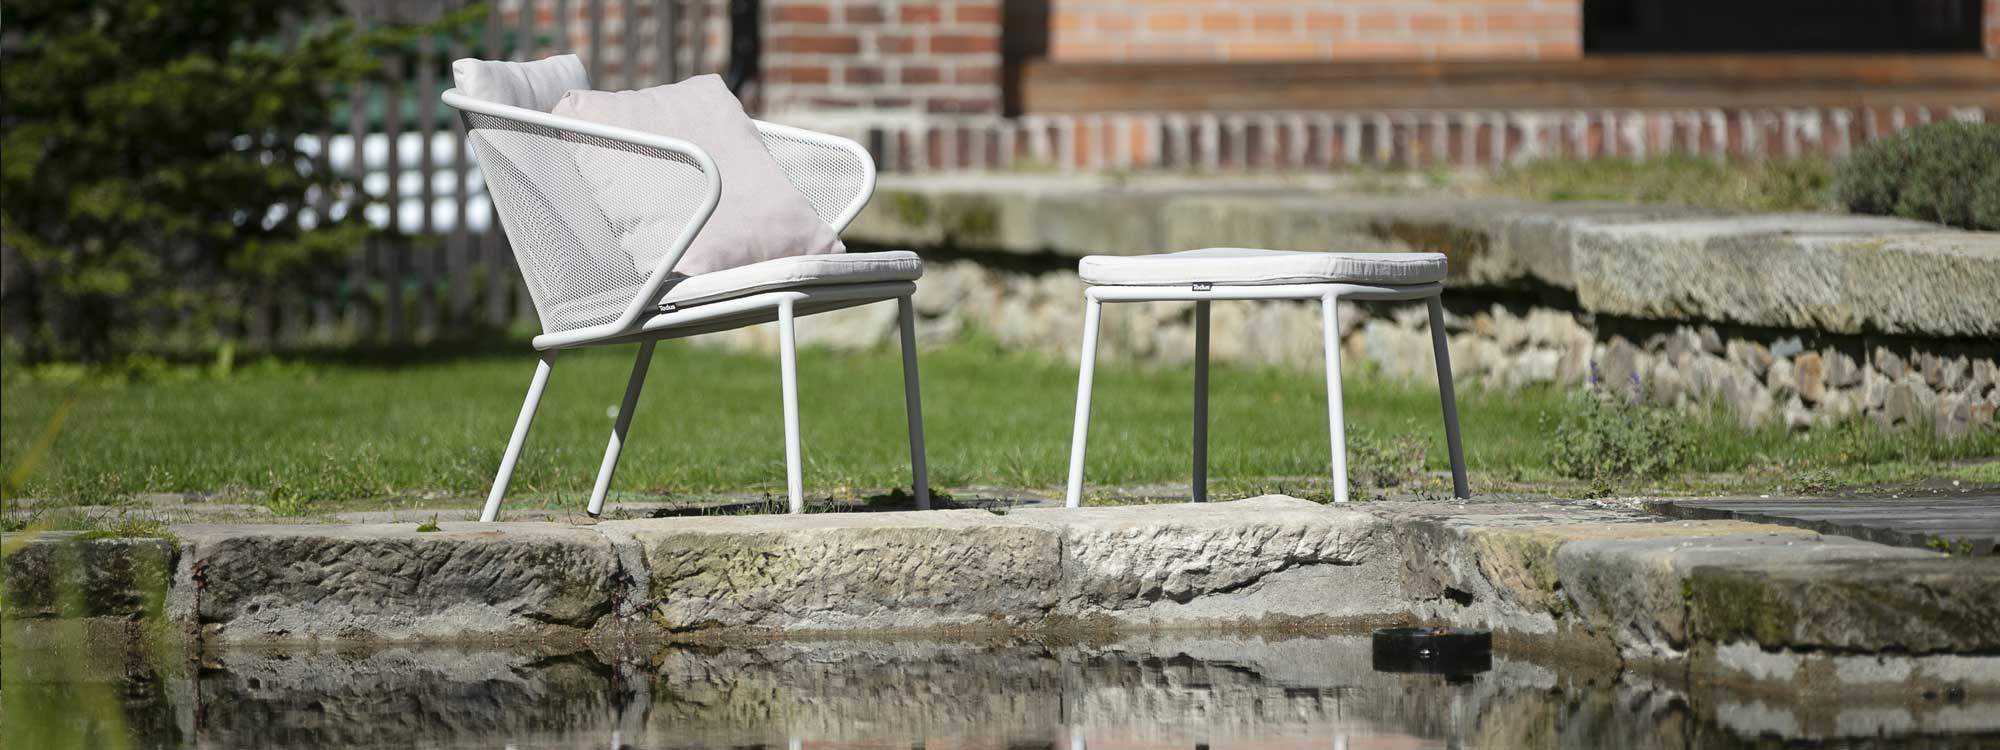 White Condor garden relax chair & foot stool next to water